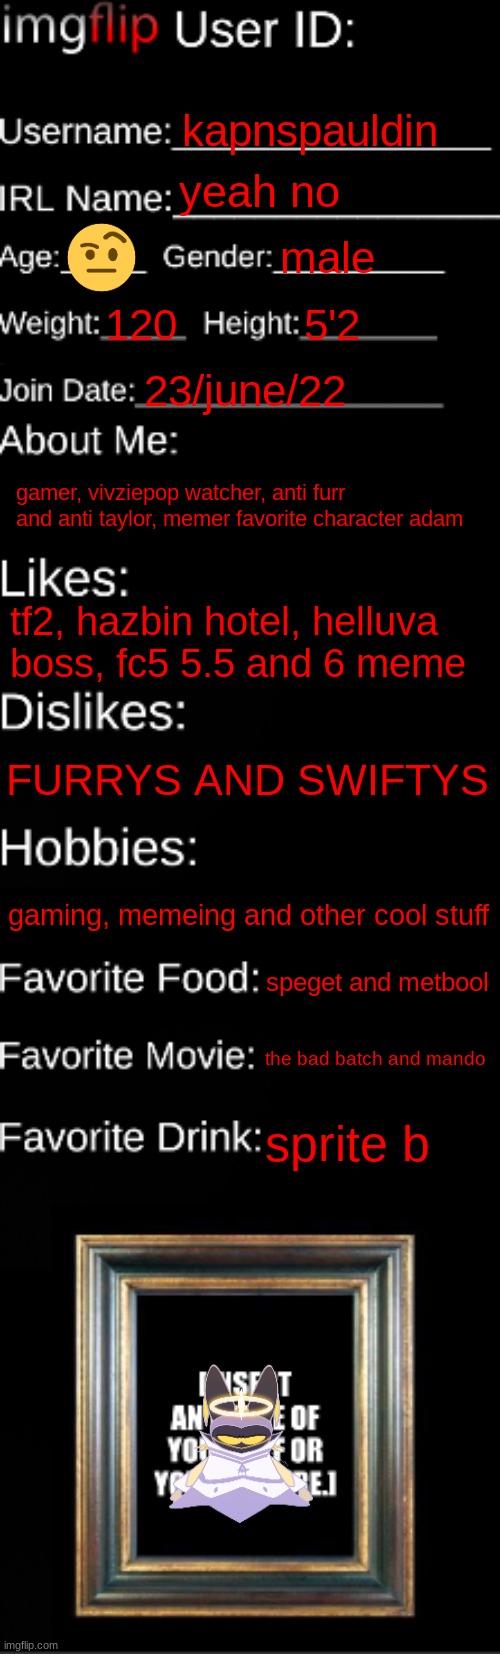 imgflip ID Card | kapnspauldin; yeah no; male; 120; 5'2; 23/june/22; gamer, vivziepop watcher, anti furr and anti taylor, memer favorite character adam; tf2, hazbin hotel, helluva boss, fc5 5.5 and 6 meme; FURRYS AND SWIFTYS; gaming, memeing and other cool stuff; speget and metbool; the bad batch and mando; sprite b | image tagged in imgflip id card | made w/ Imgflip meme maker